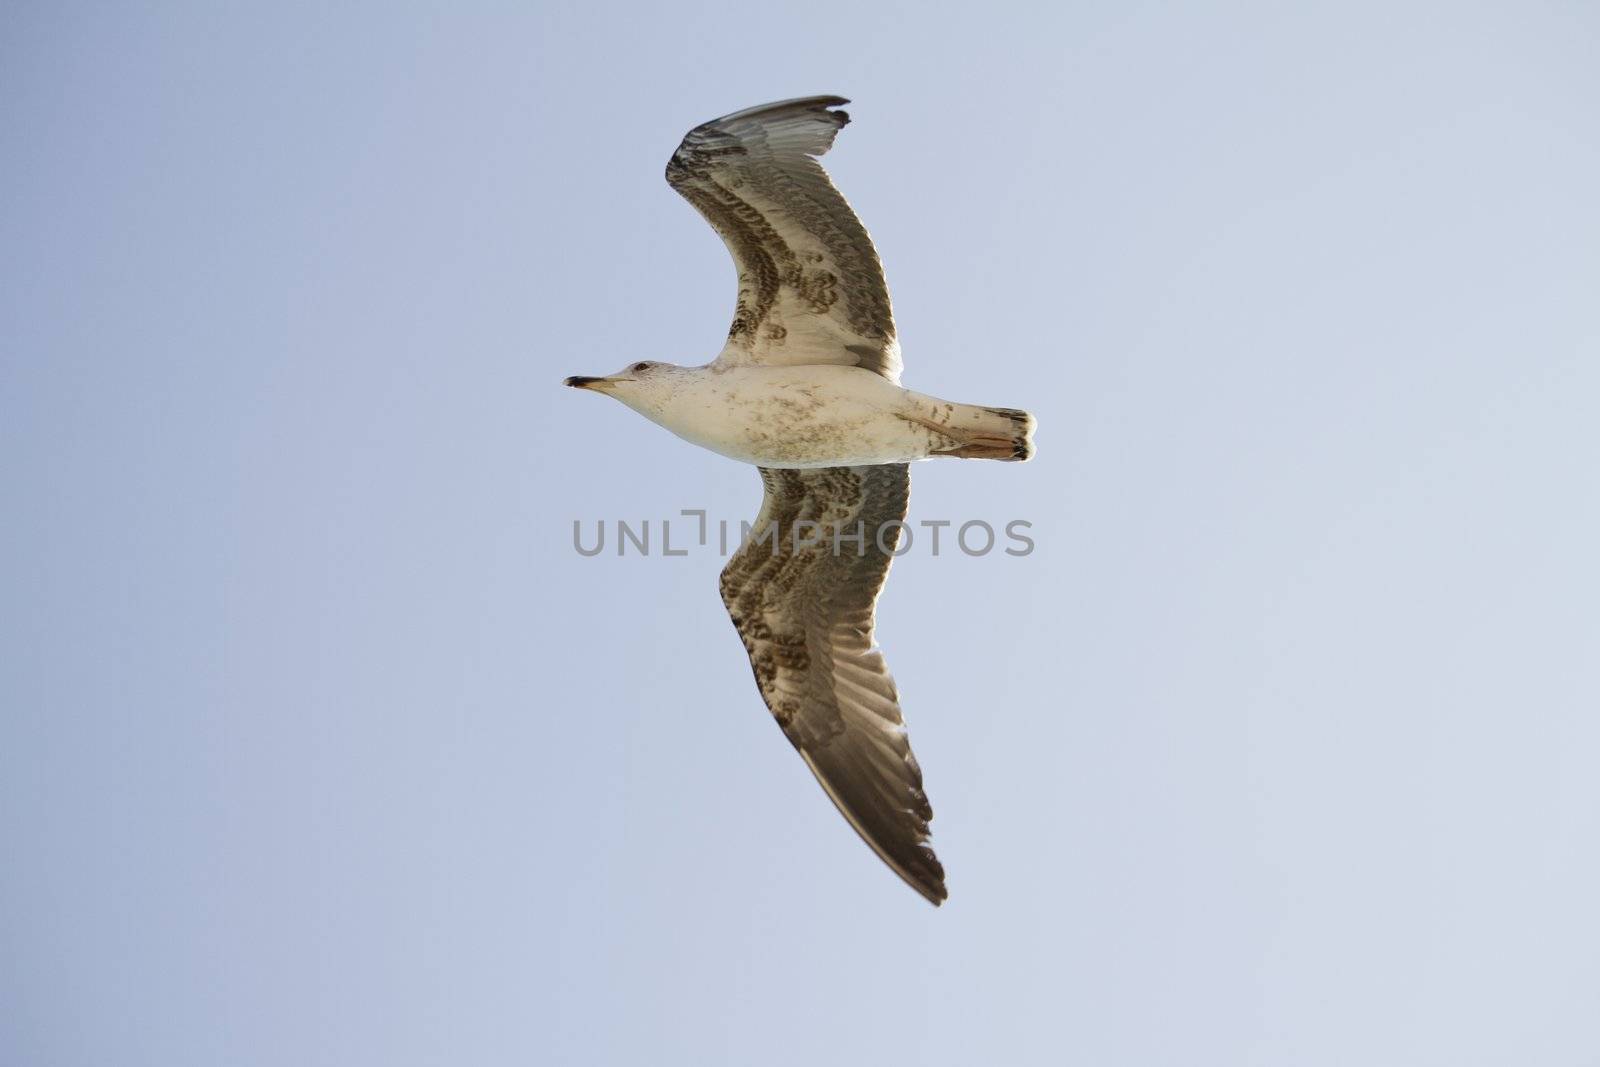 View of a juvenile seagull in plain flight next to the docks.